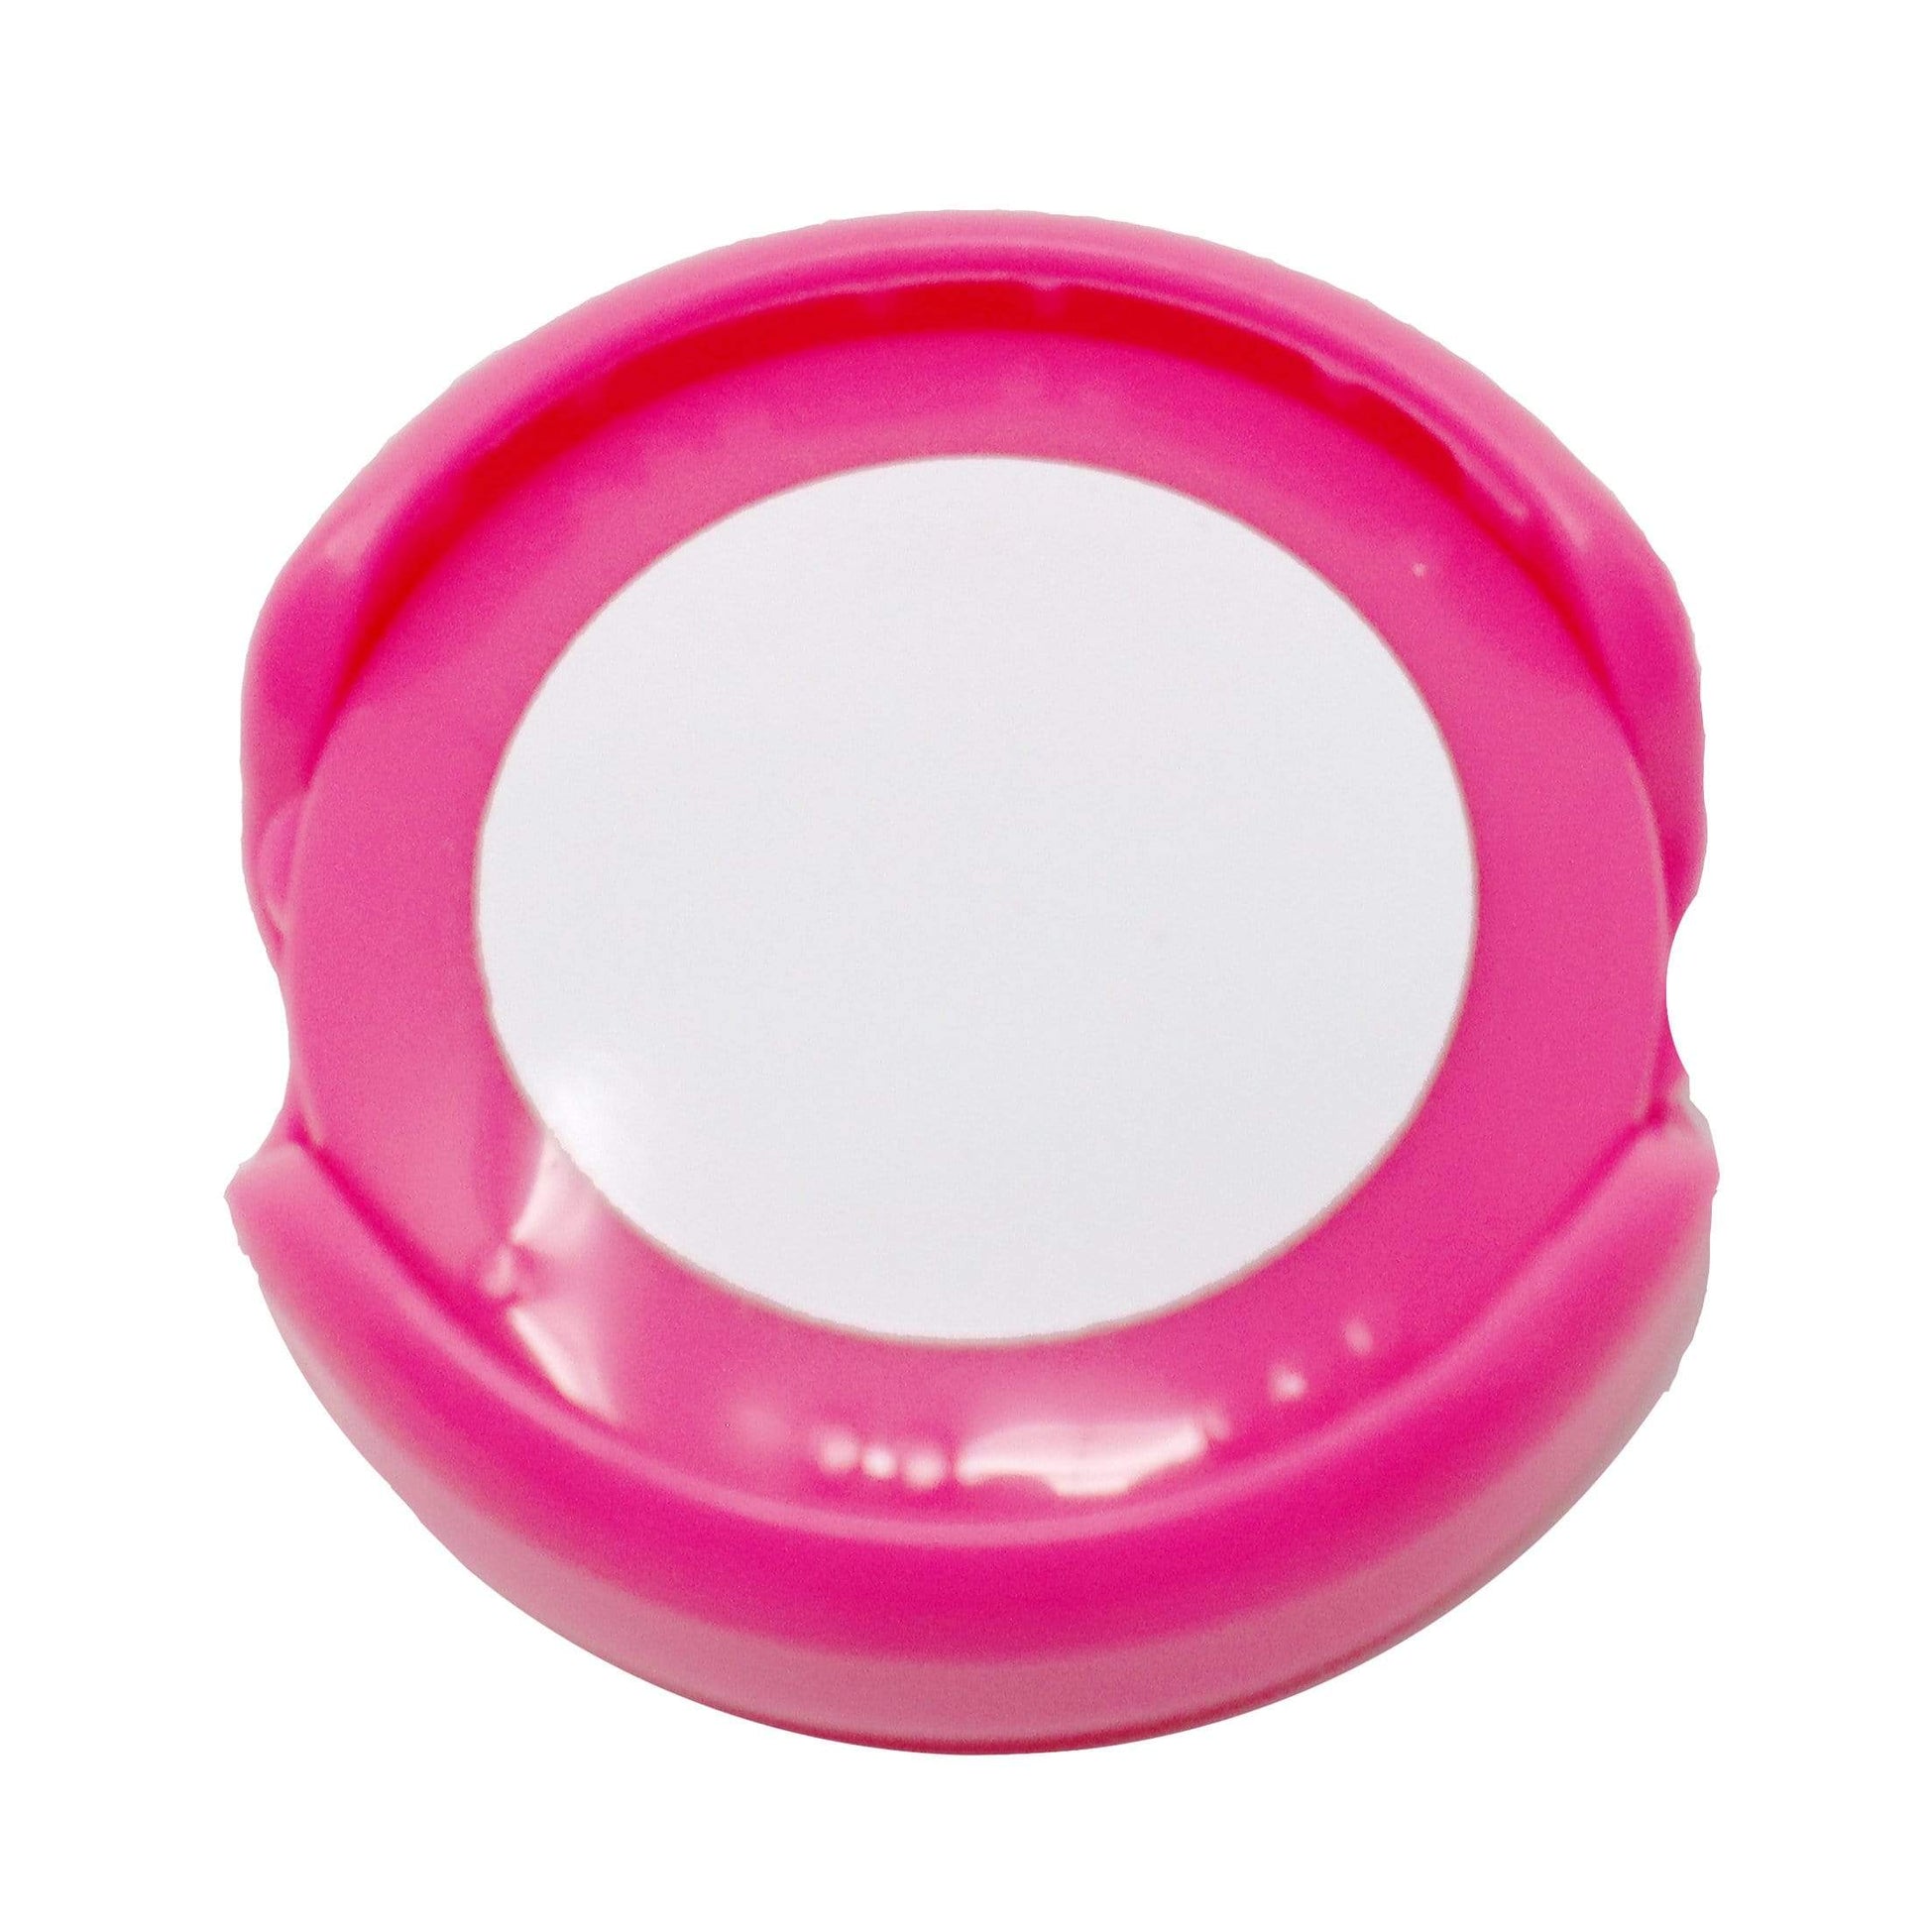 Hot Pink Antimicrobial Stethoscope ID Tag - Customizable Label & Adjustable Tube Size to Fit Most Stehs ST99-HOTPINK